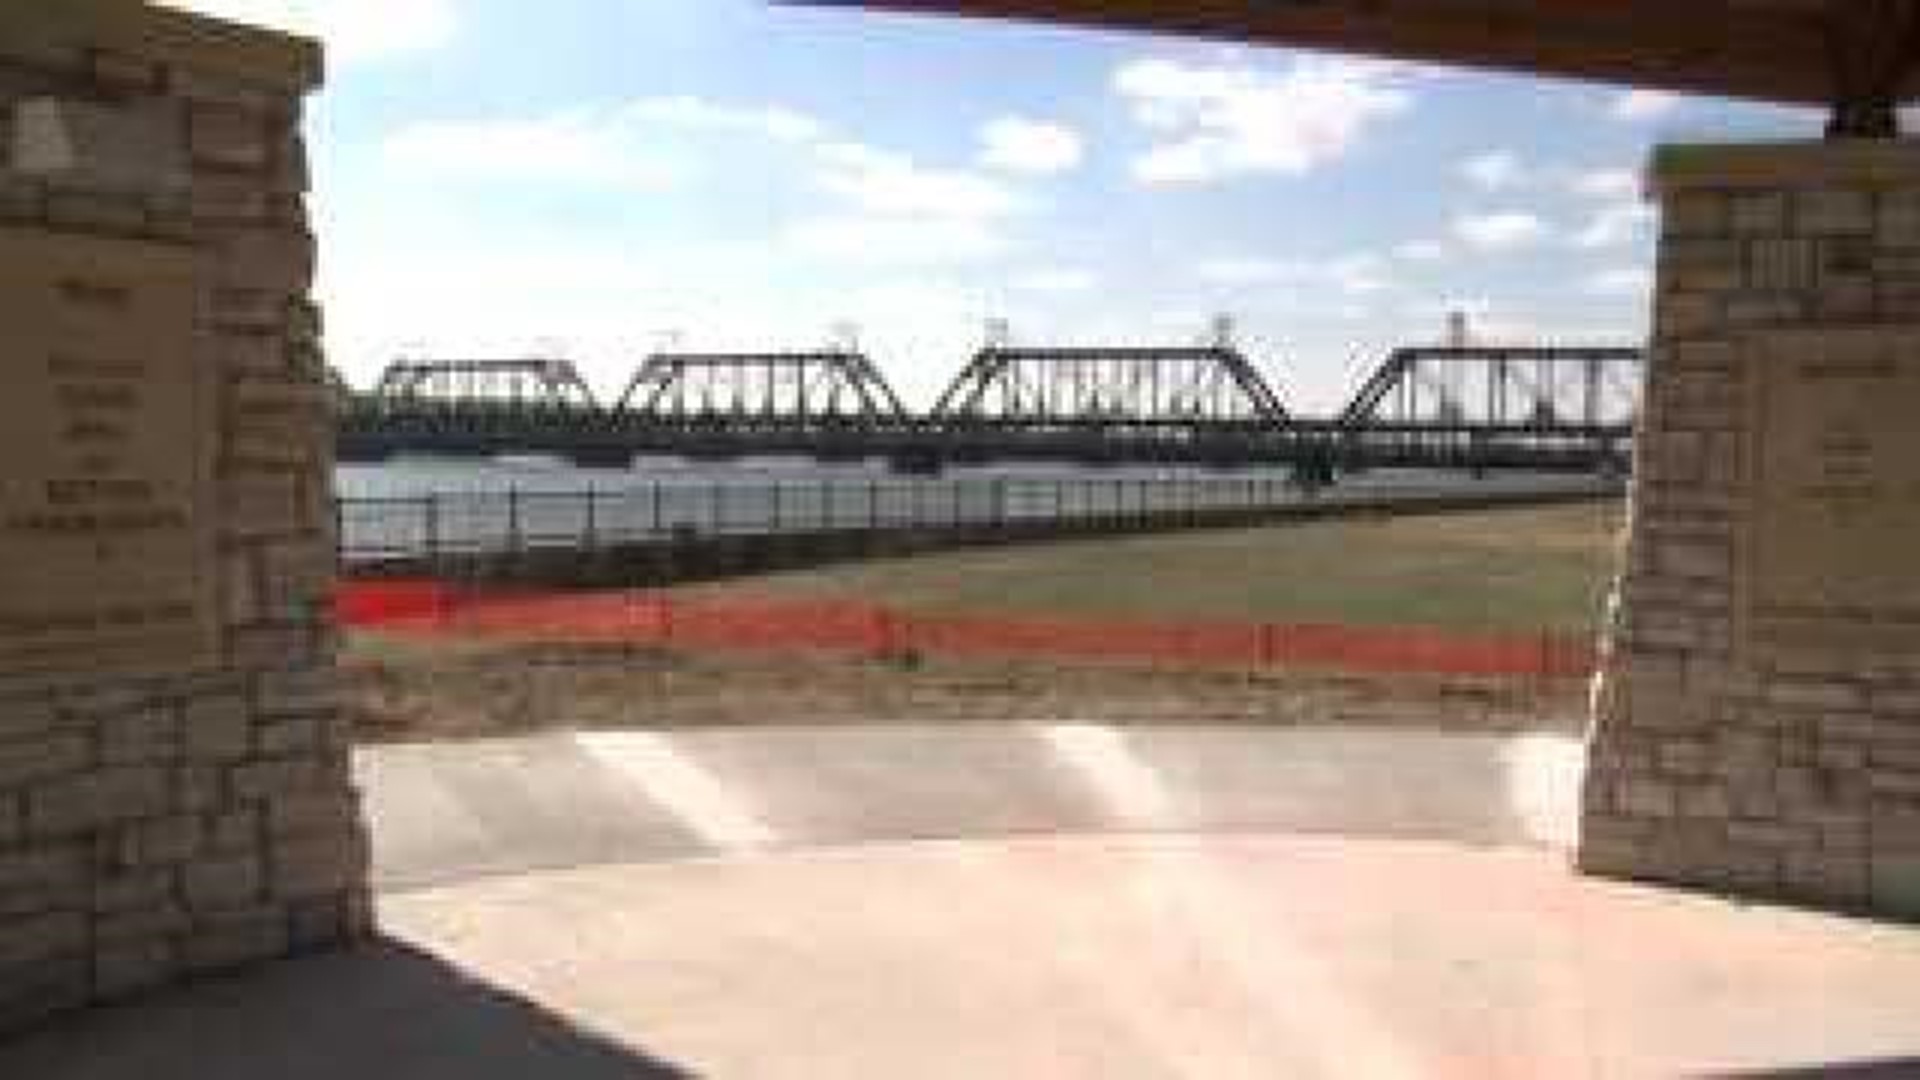 Davenport moves forward on several riverfront projects